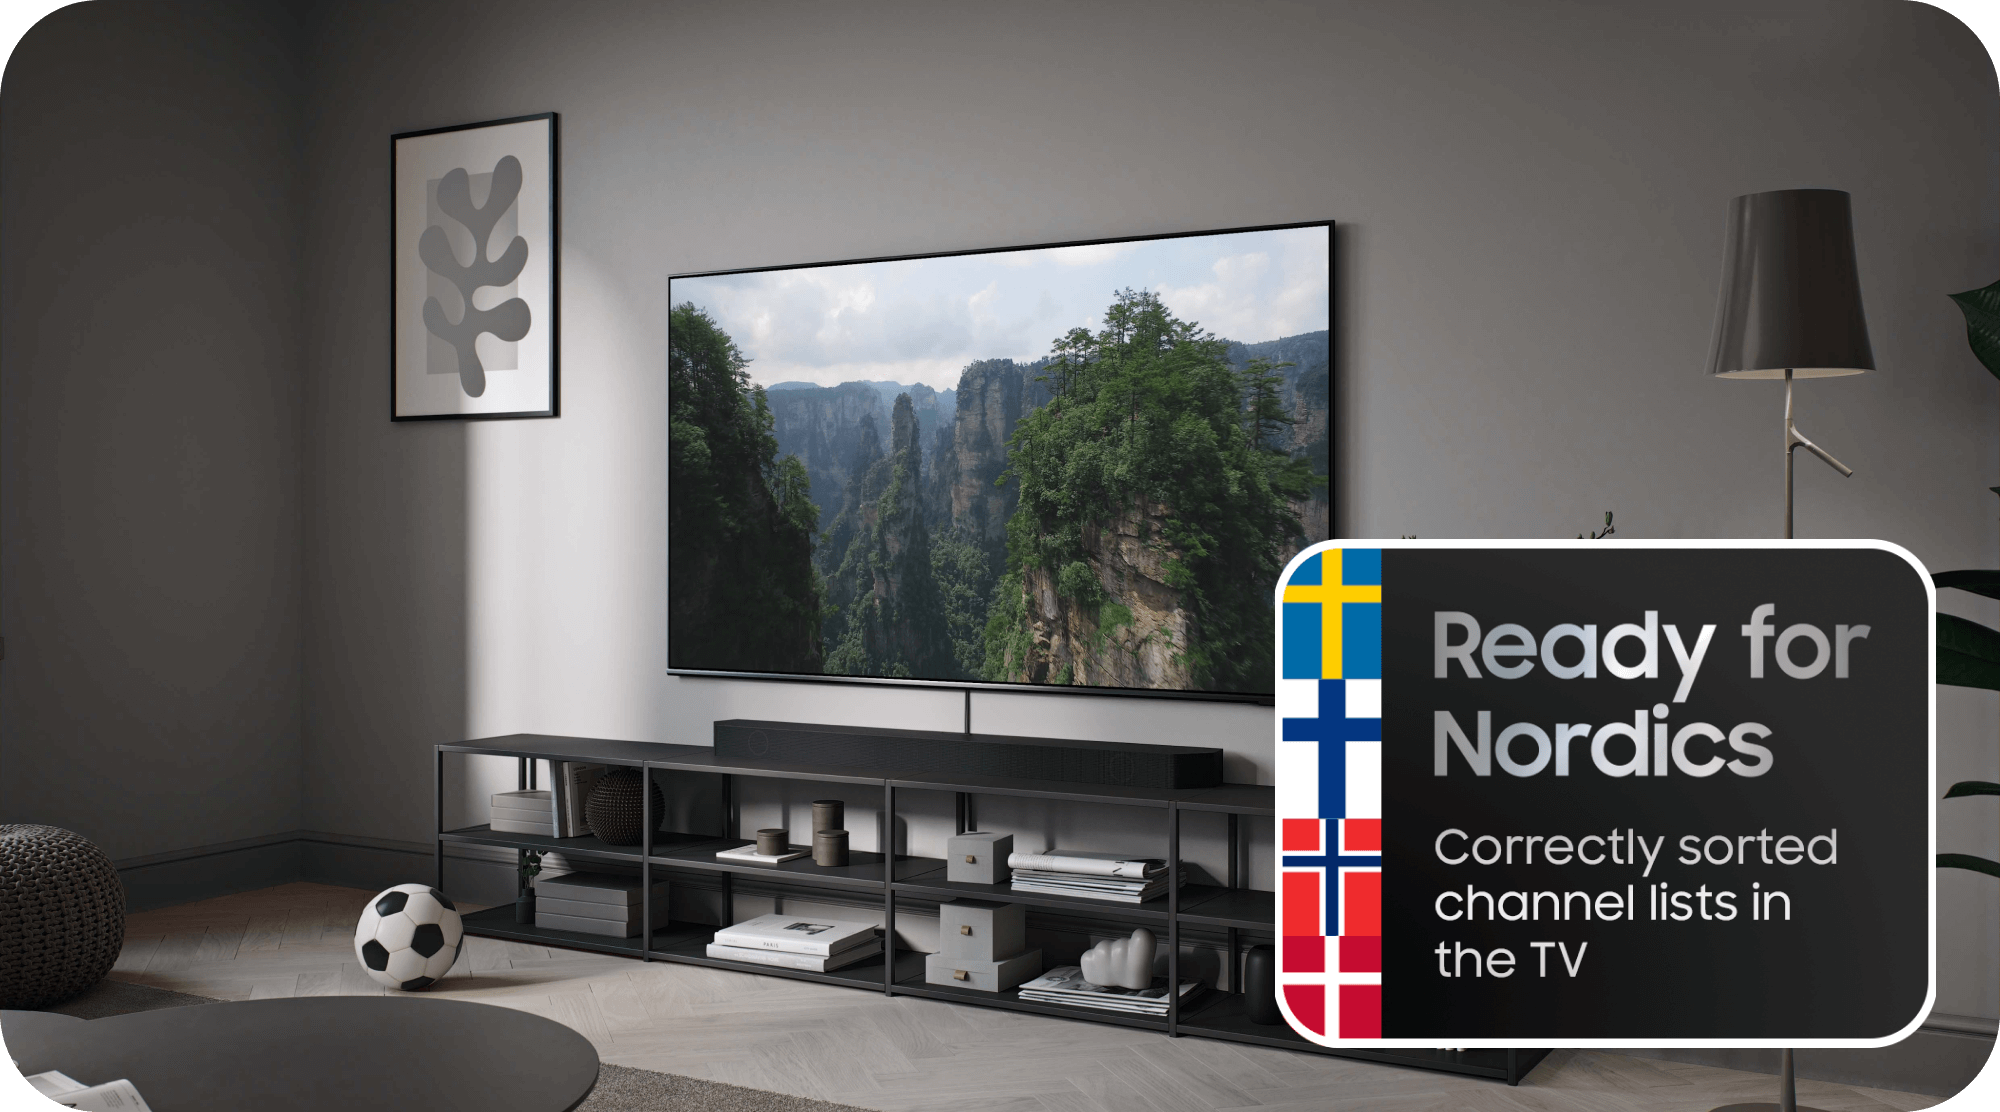 Samsung TV in a living room and Ready For Nordics text